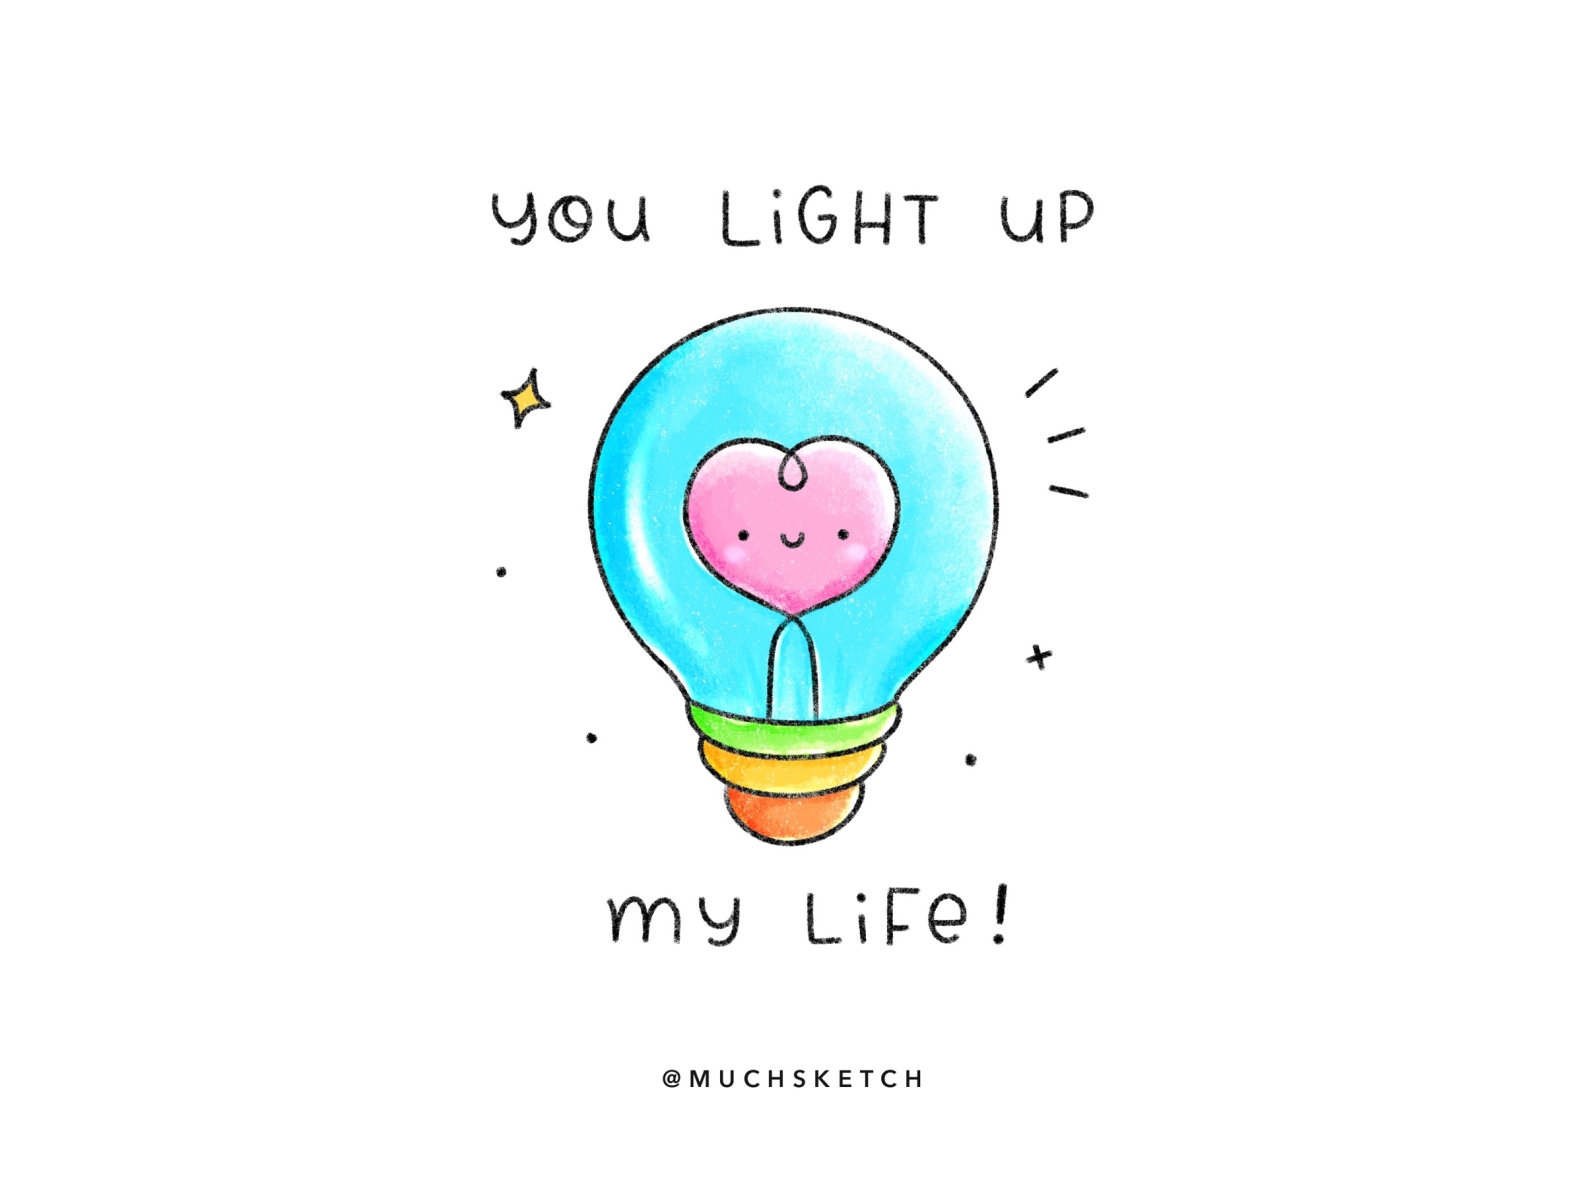 You light up my life!  by Gaia / @muchsketch on Dribbble